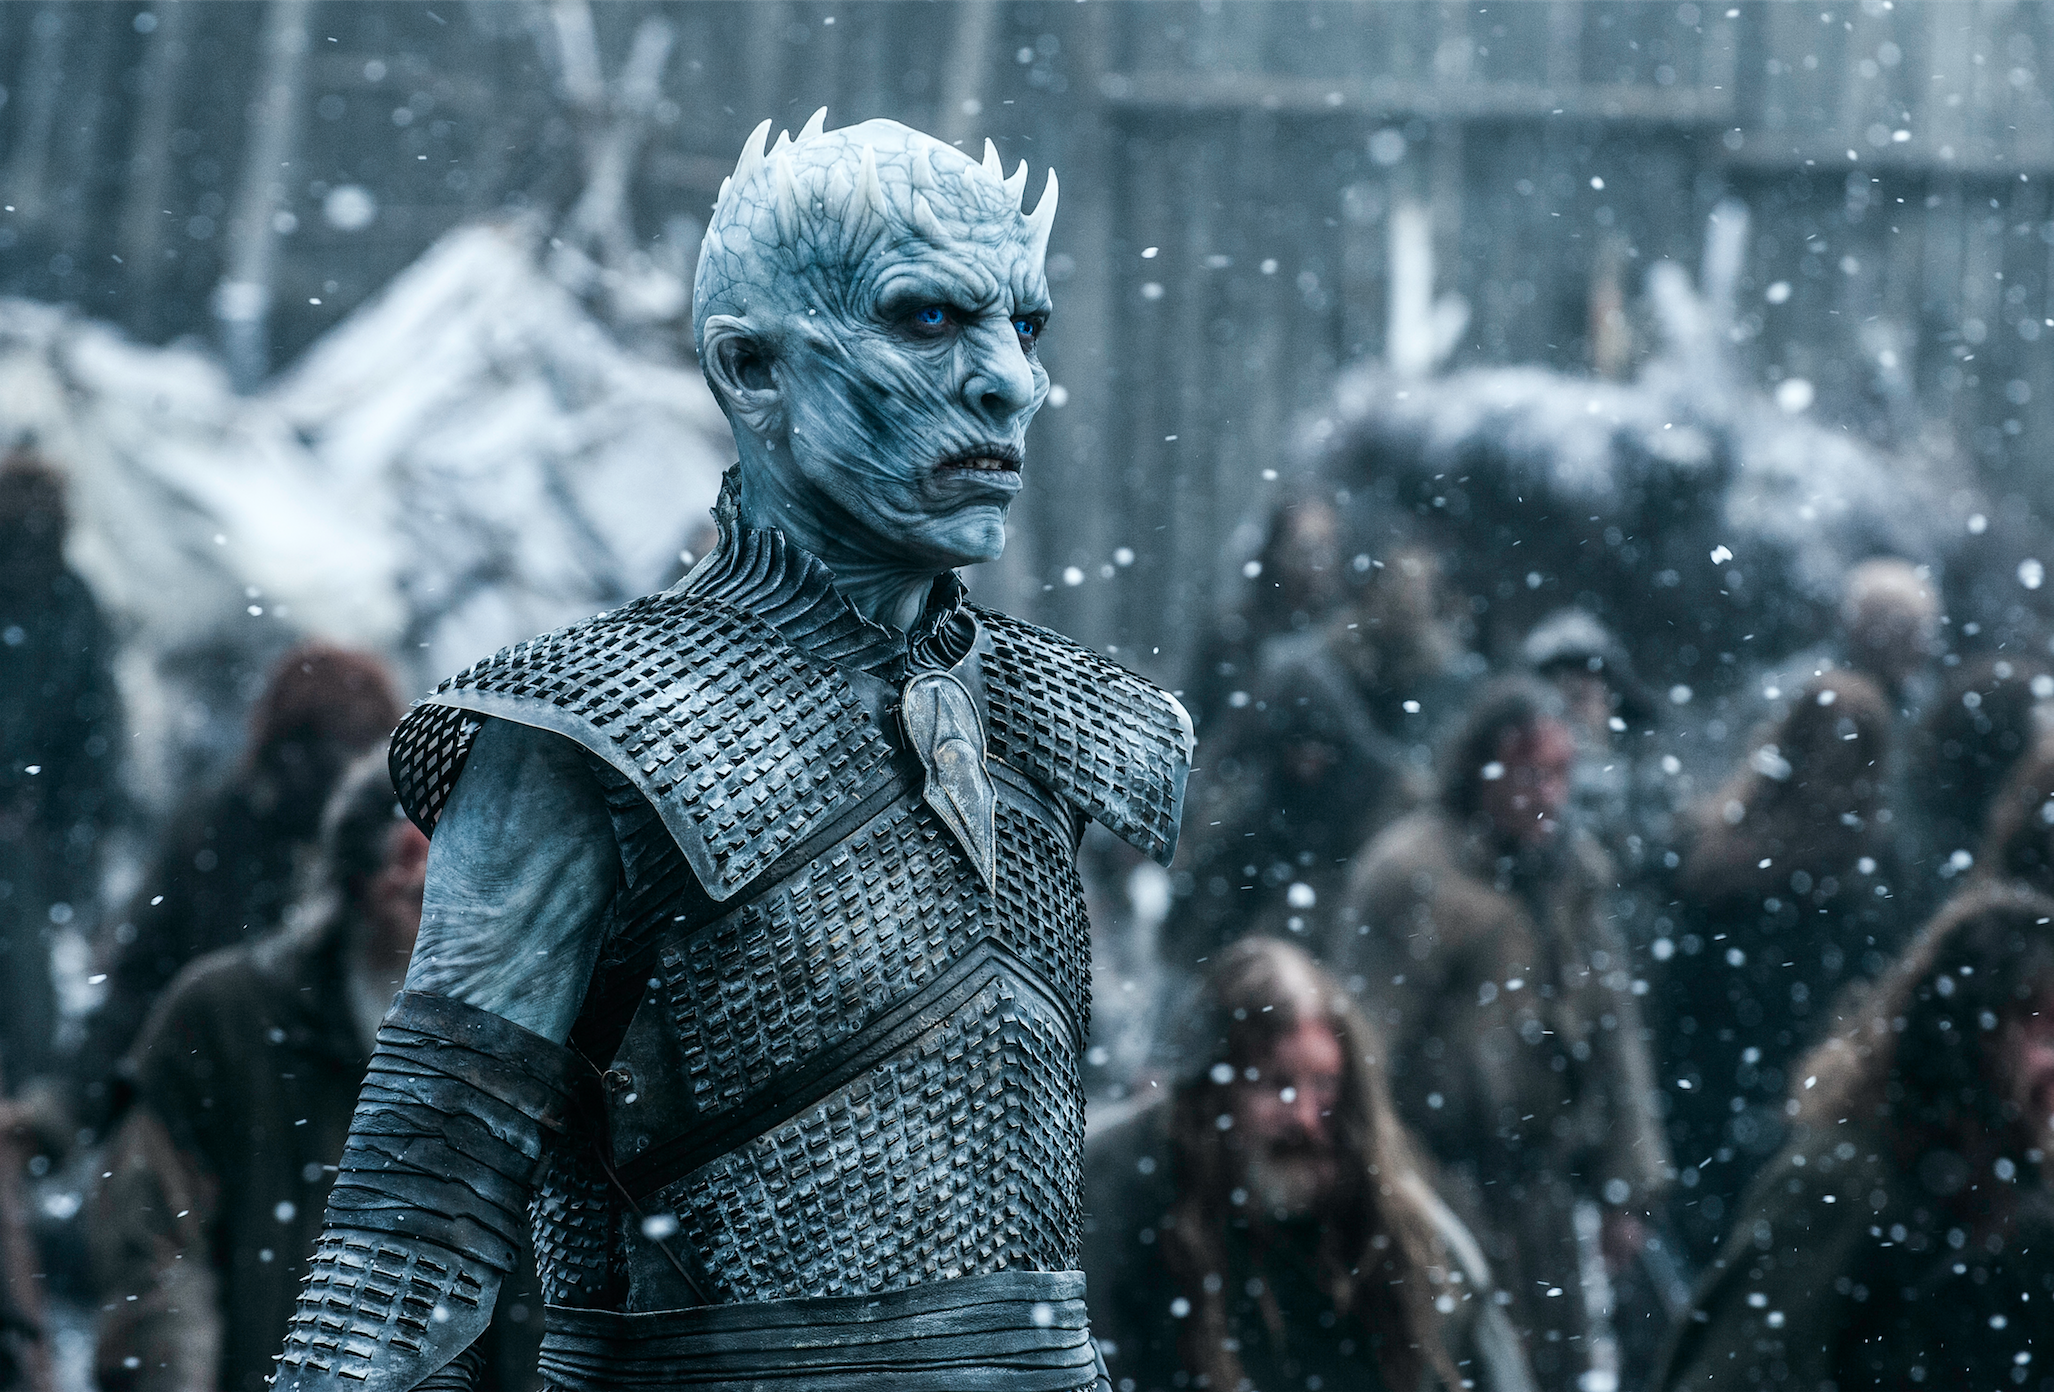 Foster voks mosaik Game of Thrones season 7's 'Beyond The Wall' revealed how Jon Snow could  kill the White Walkers for good